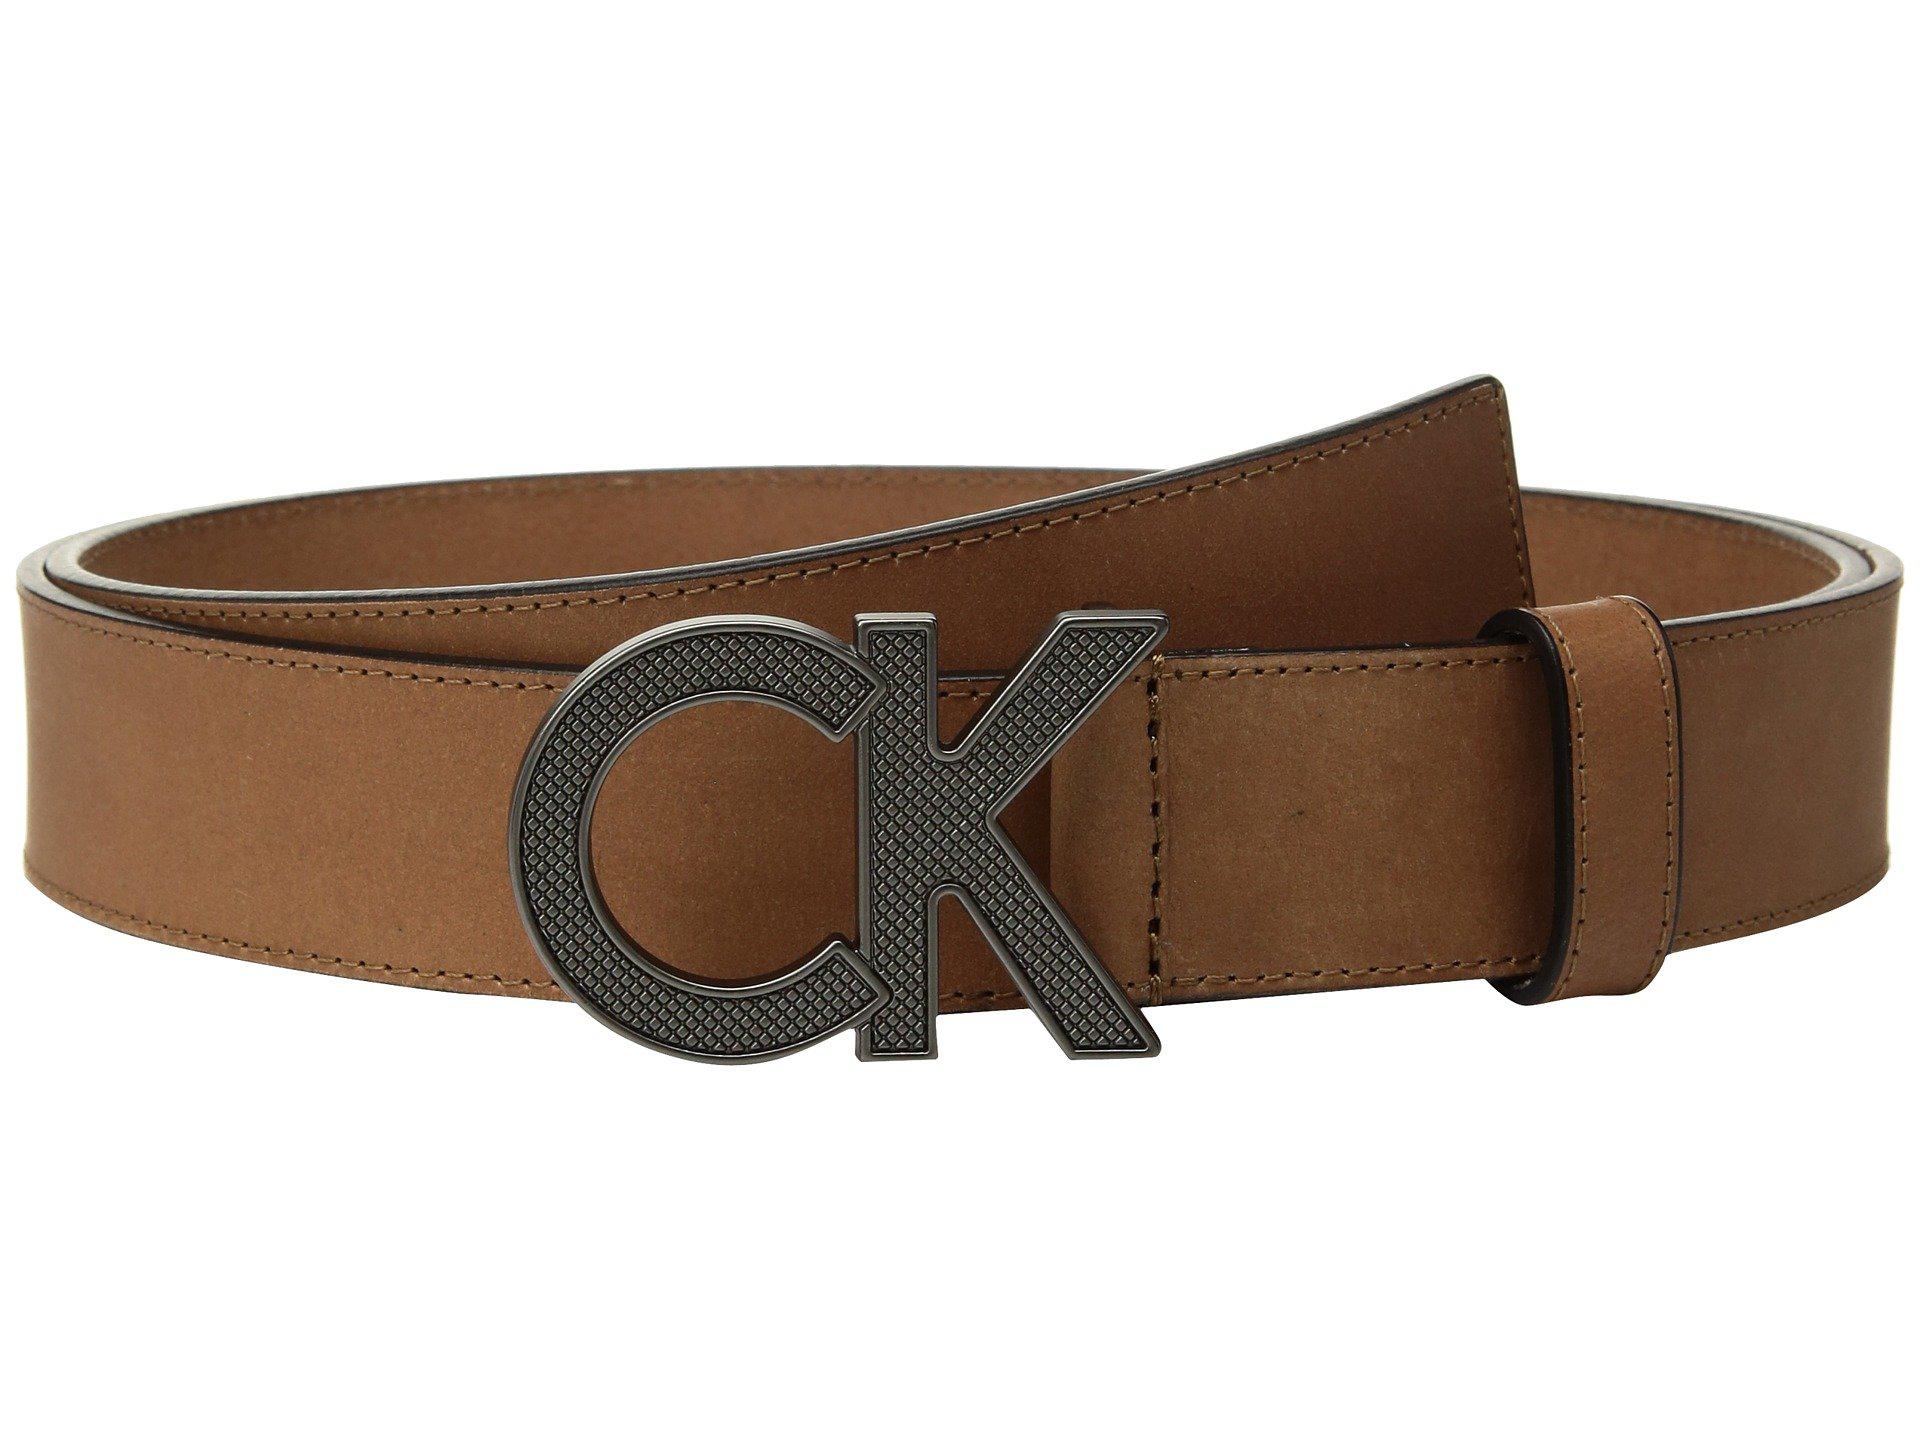 ck brown belt Cheaper Than Retail Price> Buy Clothing, Accessories and  lifestyle products for women & men -